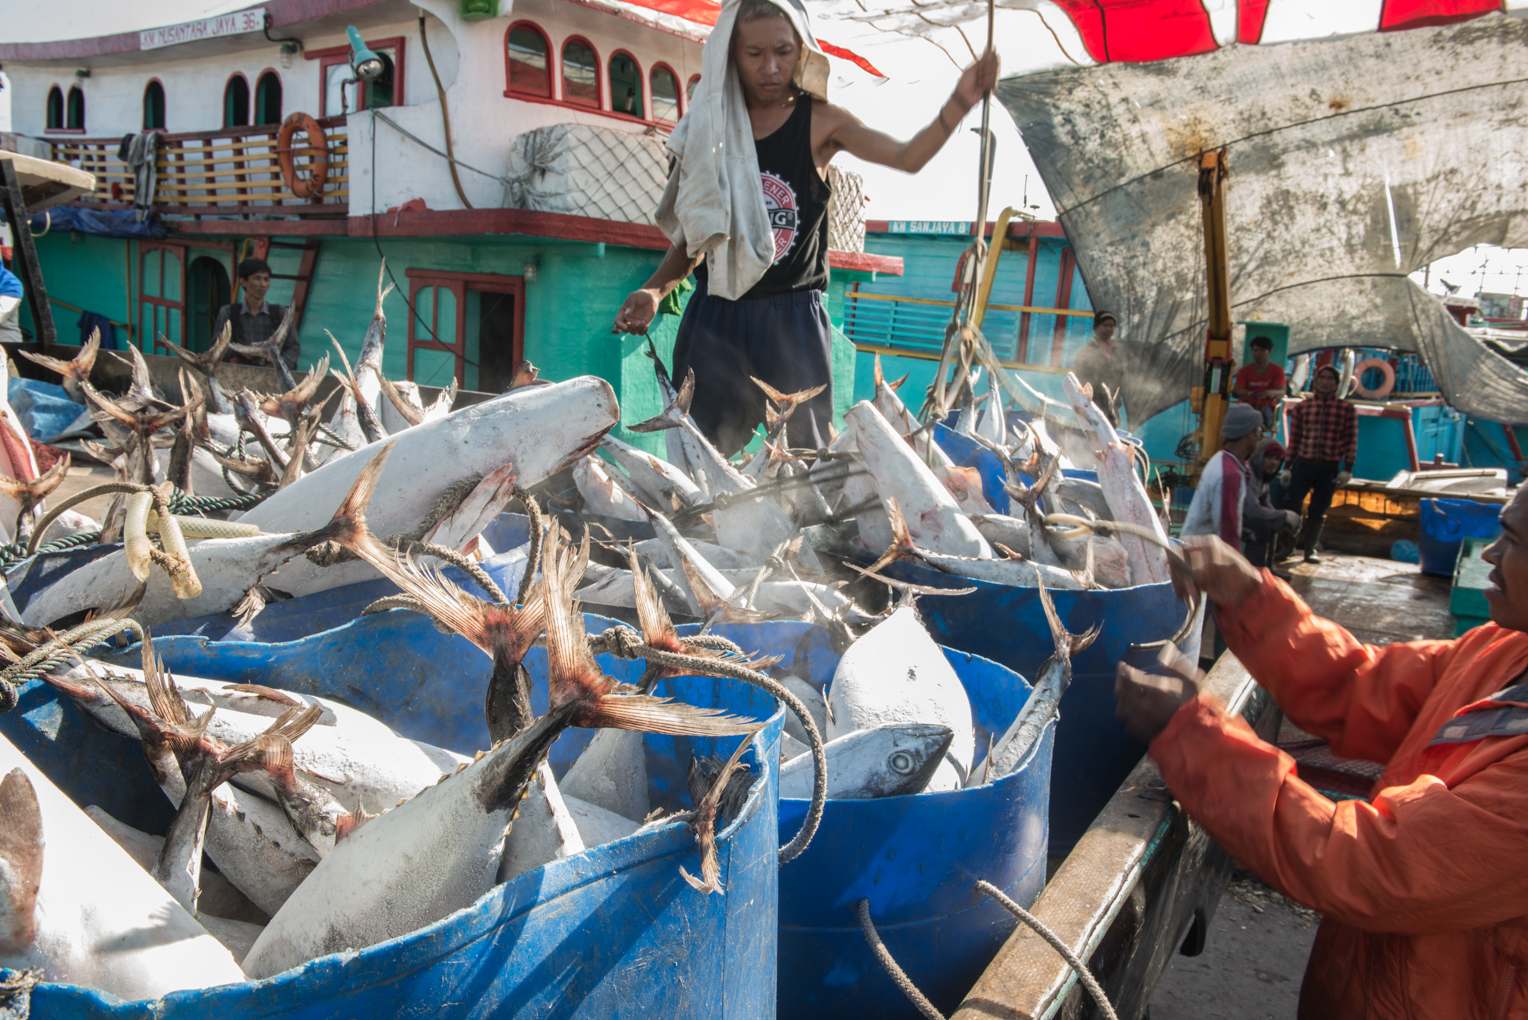 the-vessels-main-catch-was-skipjack-tuna-stocks-of-which-are-running-low-due-to-overfishing-photo-by-johnny-langenheim.jpg